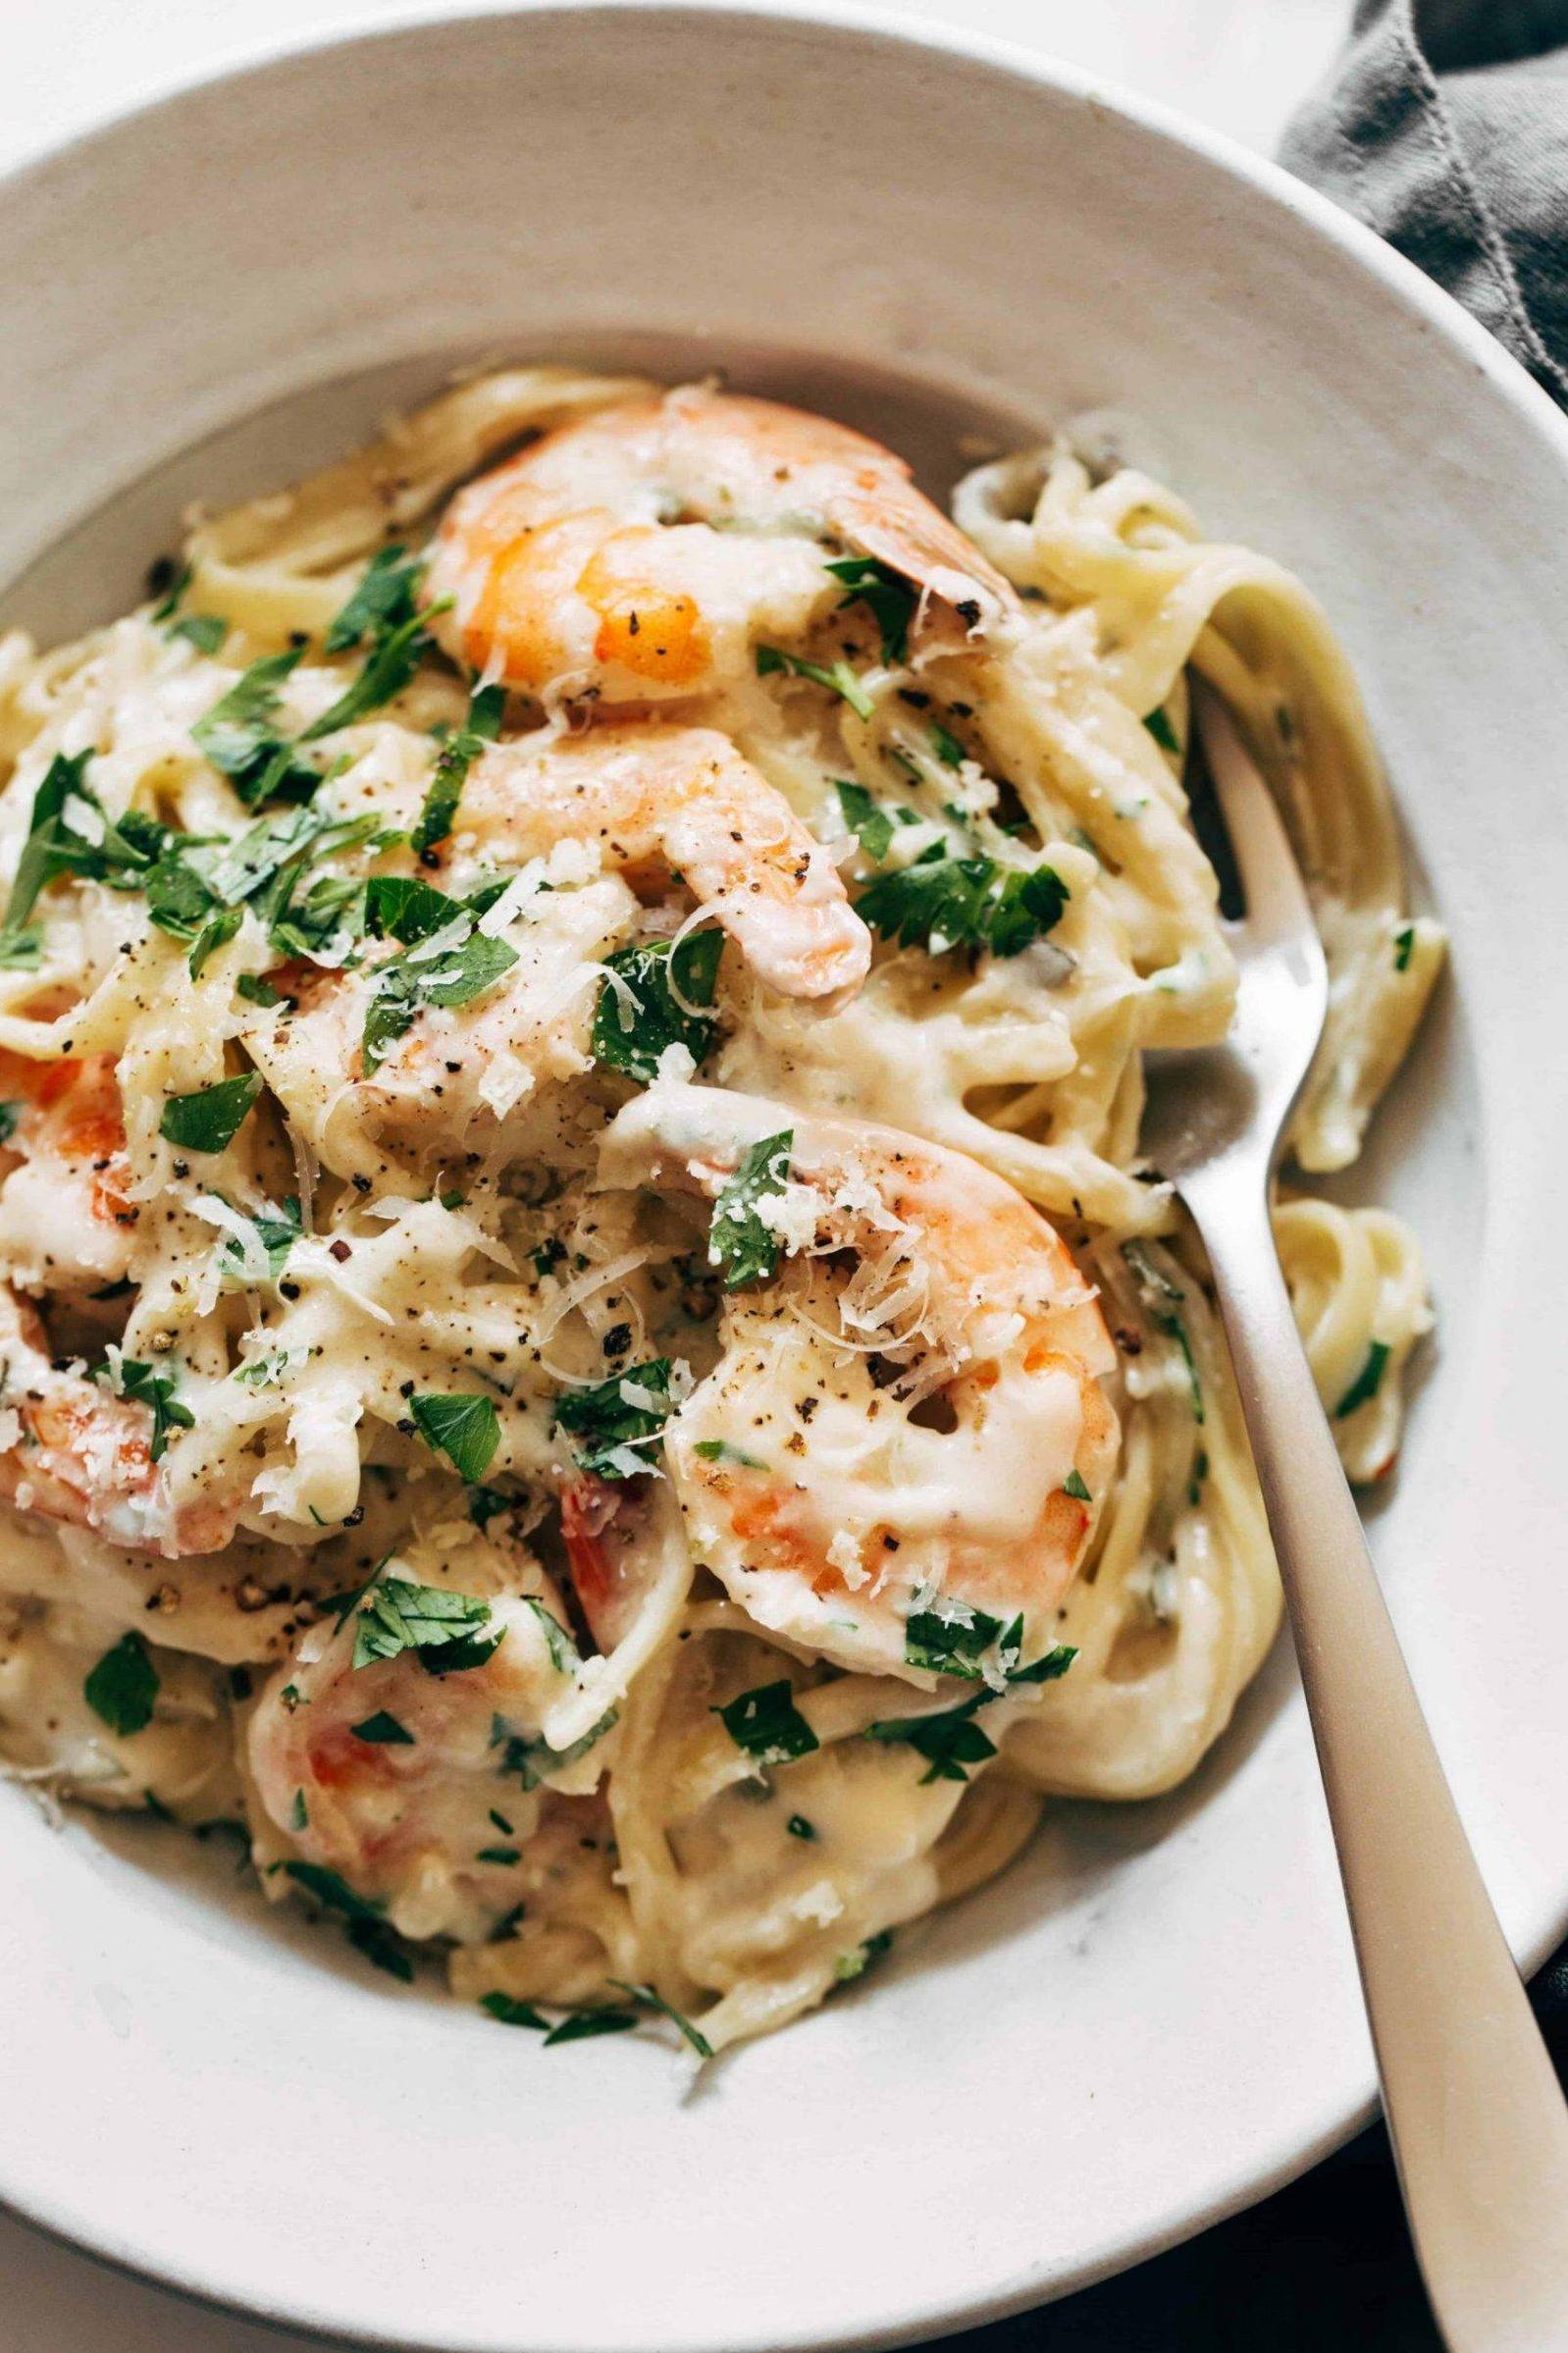  Perfectly cooked shrimp bathed in flavorful white wine sauce